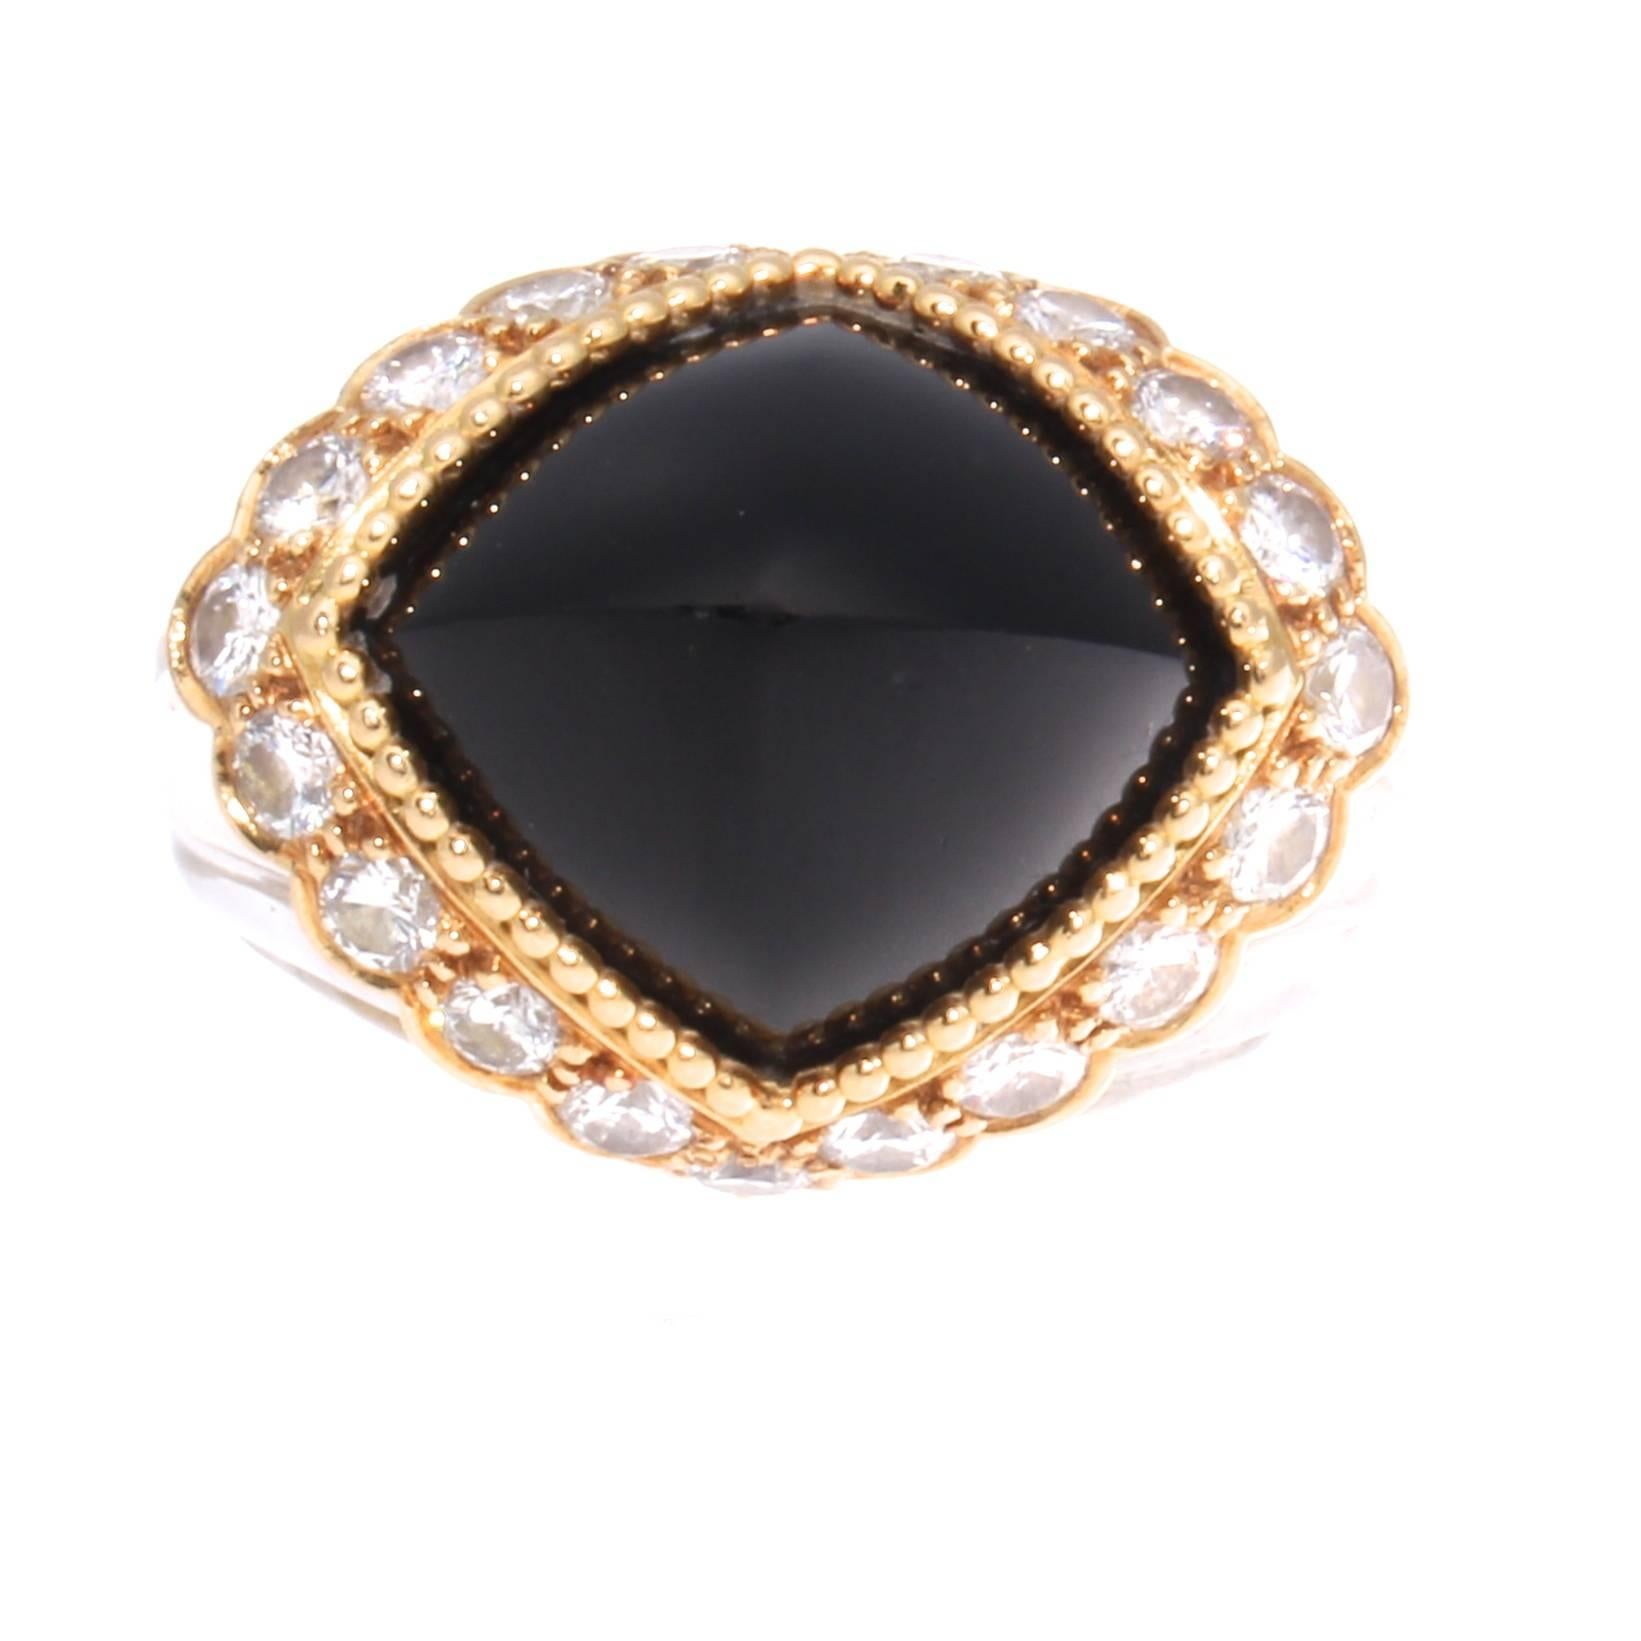 A big, bold eye pleasing creation with the classic use of yellow, black and white colors from the French jewelry house of Boucheron. Featuring a clean, sleek cabochon onyx that has been surrounded by a ring of clean, white round cut diamonds. The